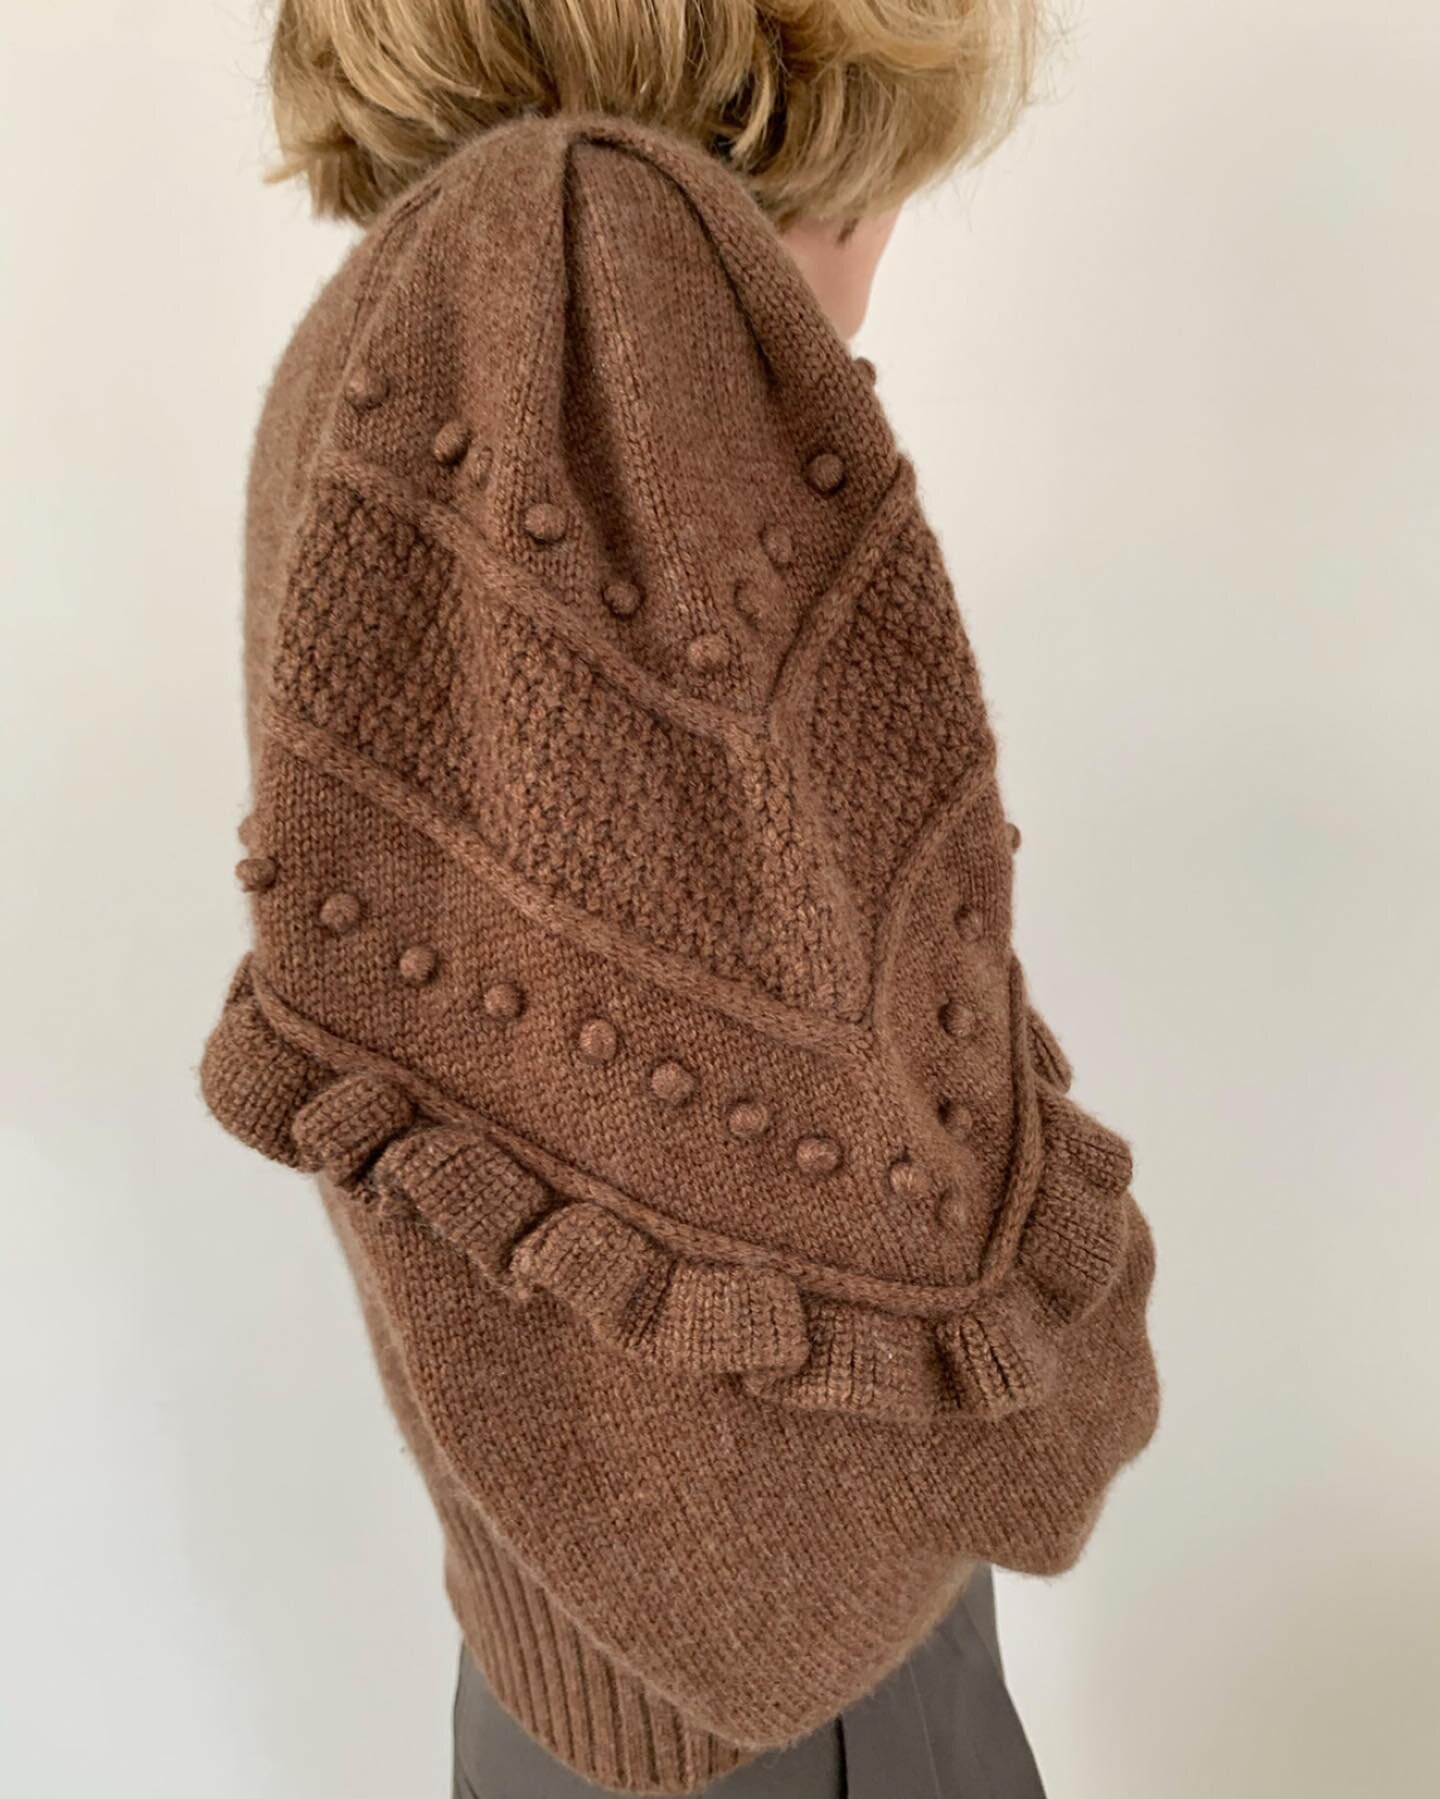 Focus on the nice handmade details  and design we do on Cardigan  Bowy . Cardigan Bowy  is always a good idea for spring
🅝🅓 paris 

#handmadeknit